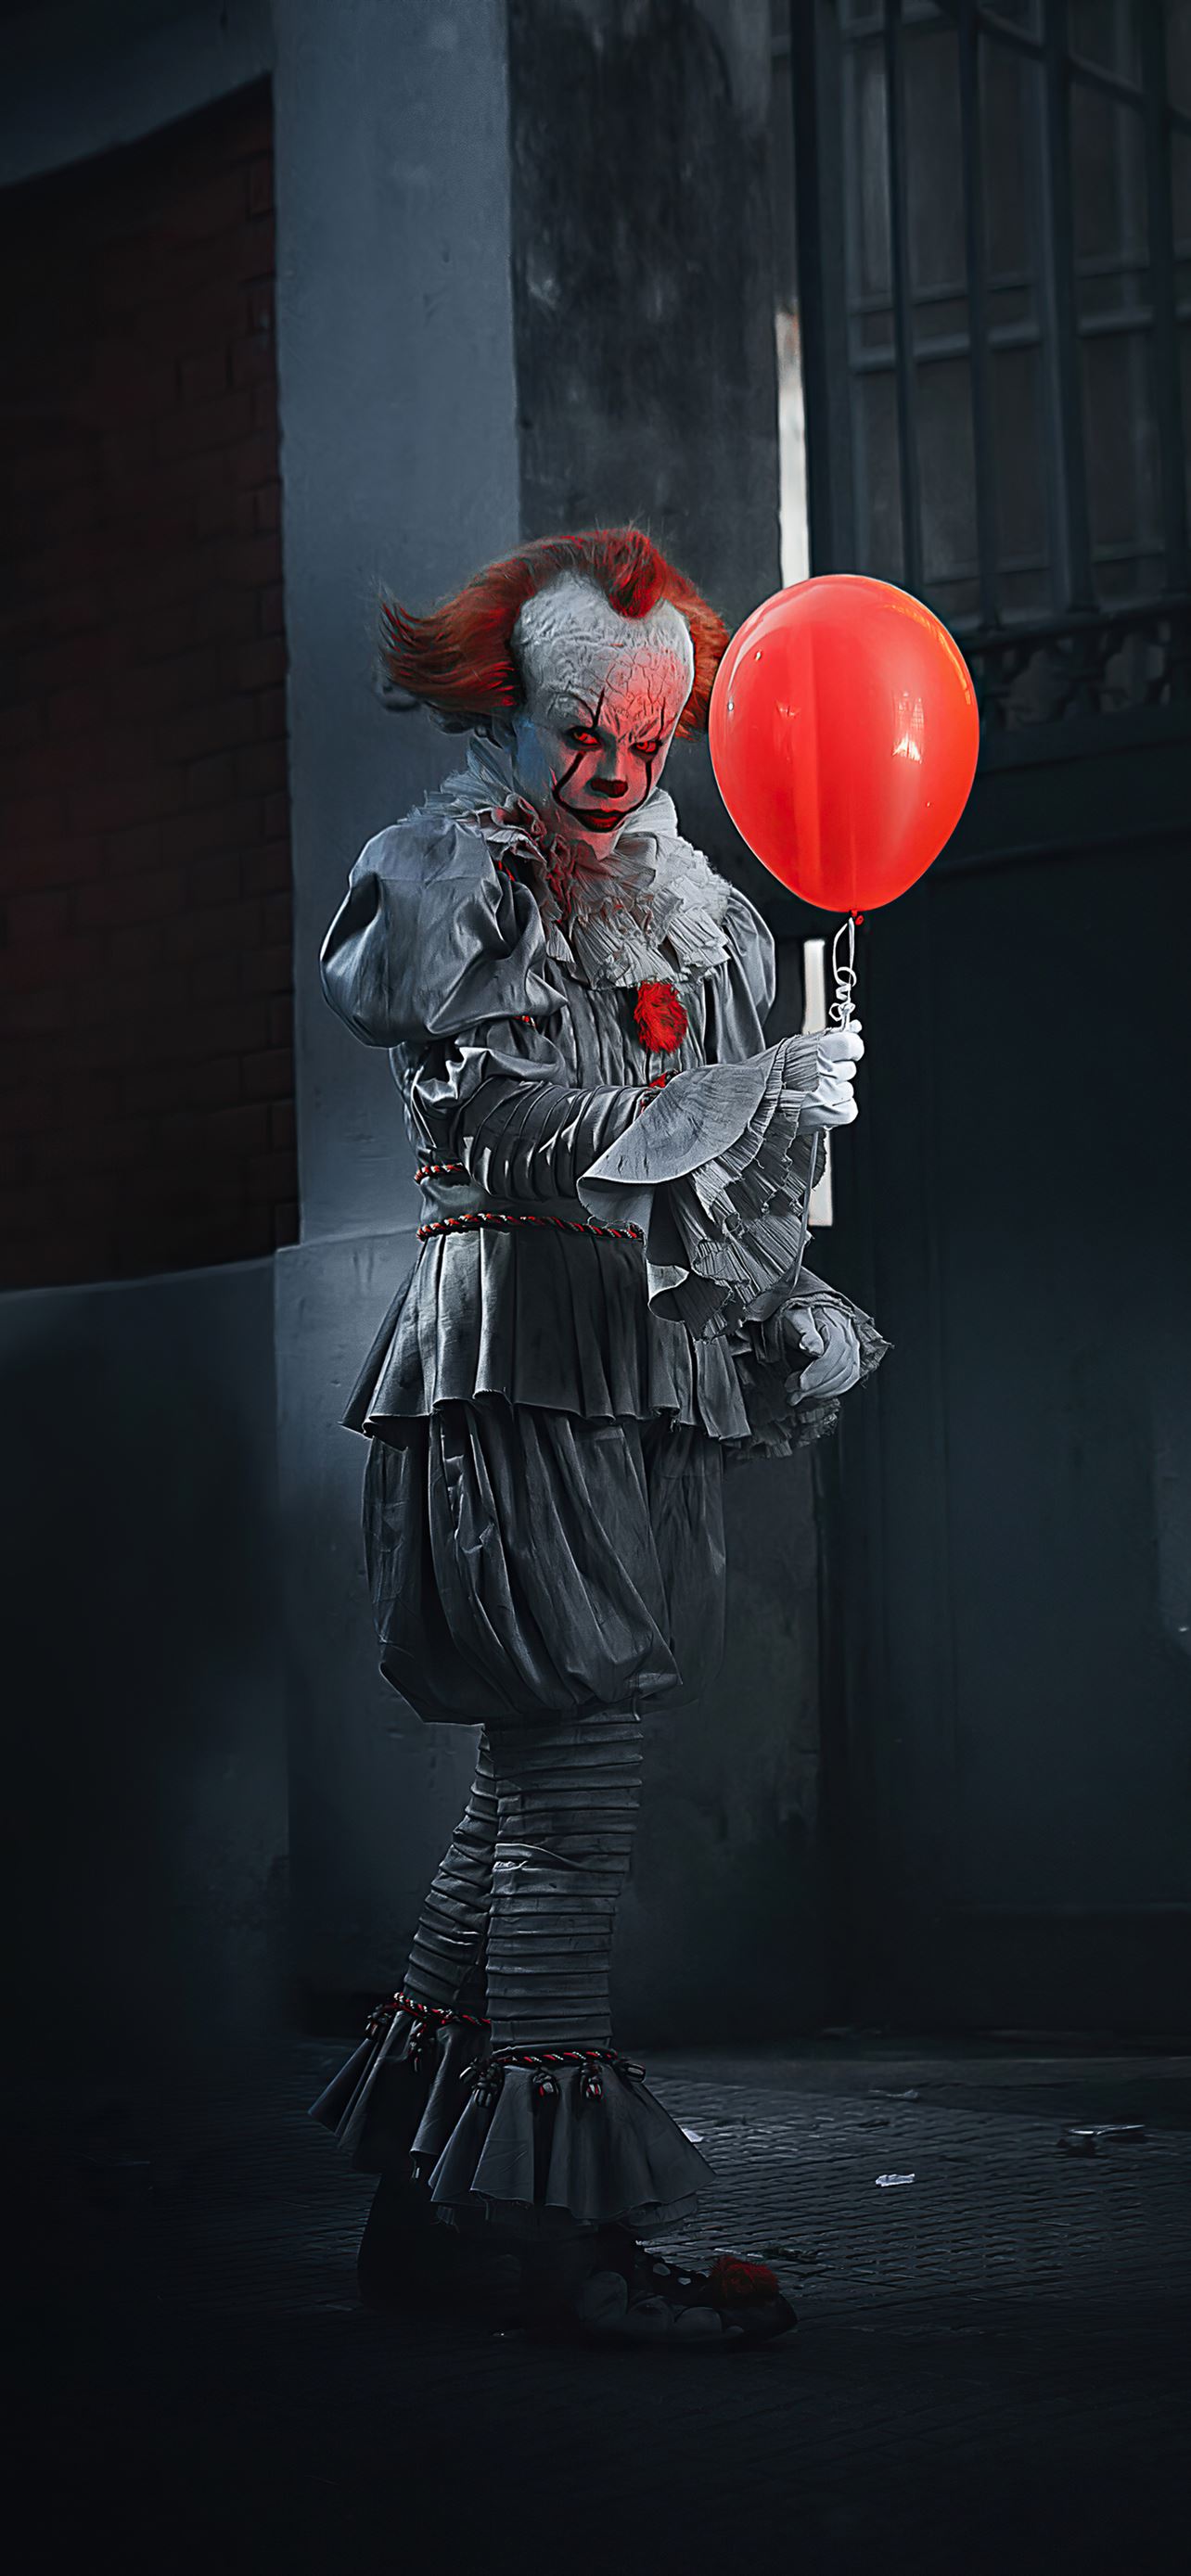 Pennywise The Clown Wallpapers  Top Free Pennywise The Clown Backgrounds   WallpaperAccess